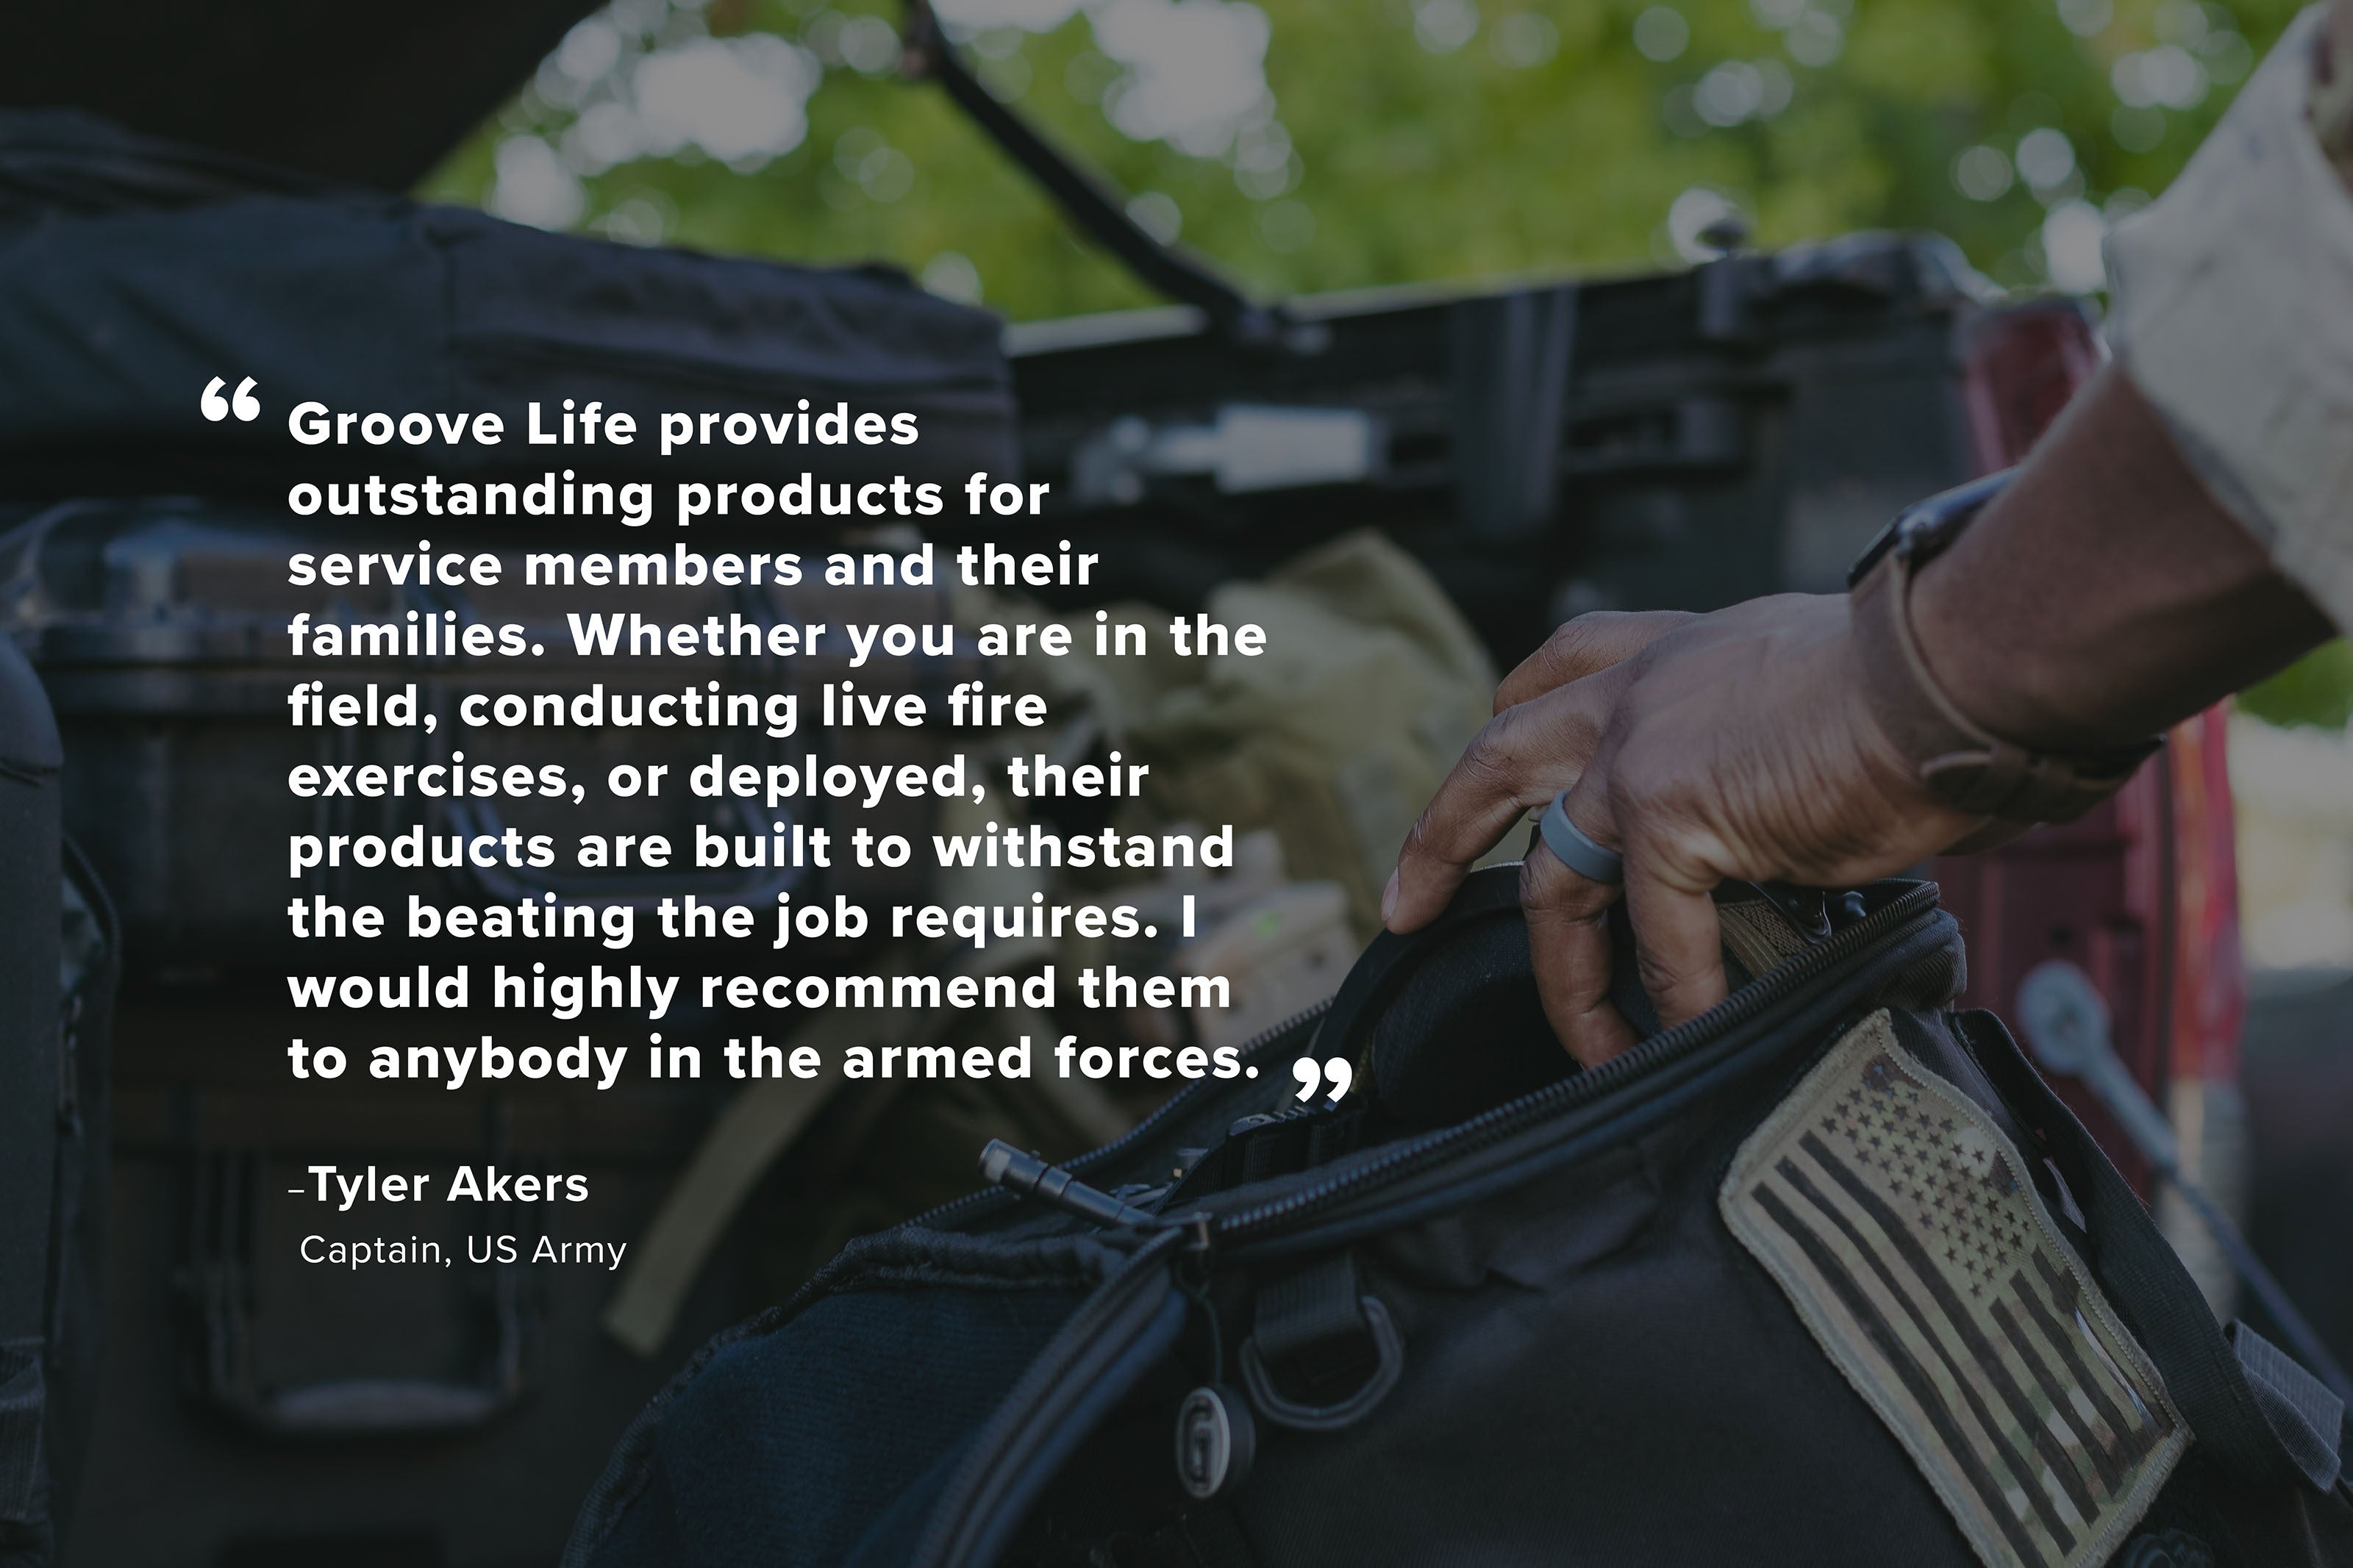 Testimonial from Captian Tyler Akers, US Army